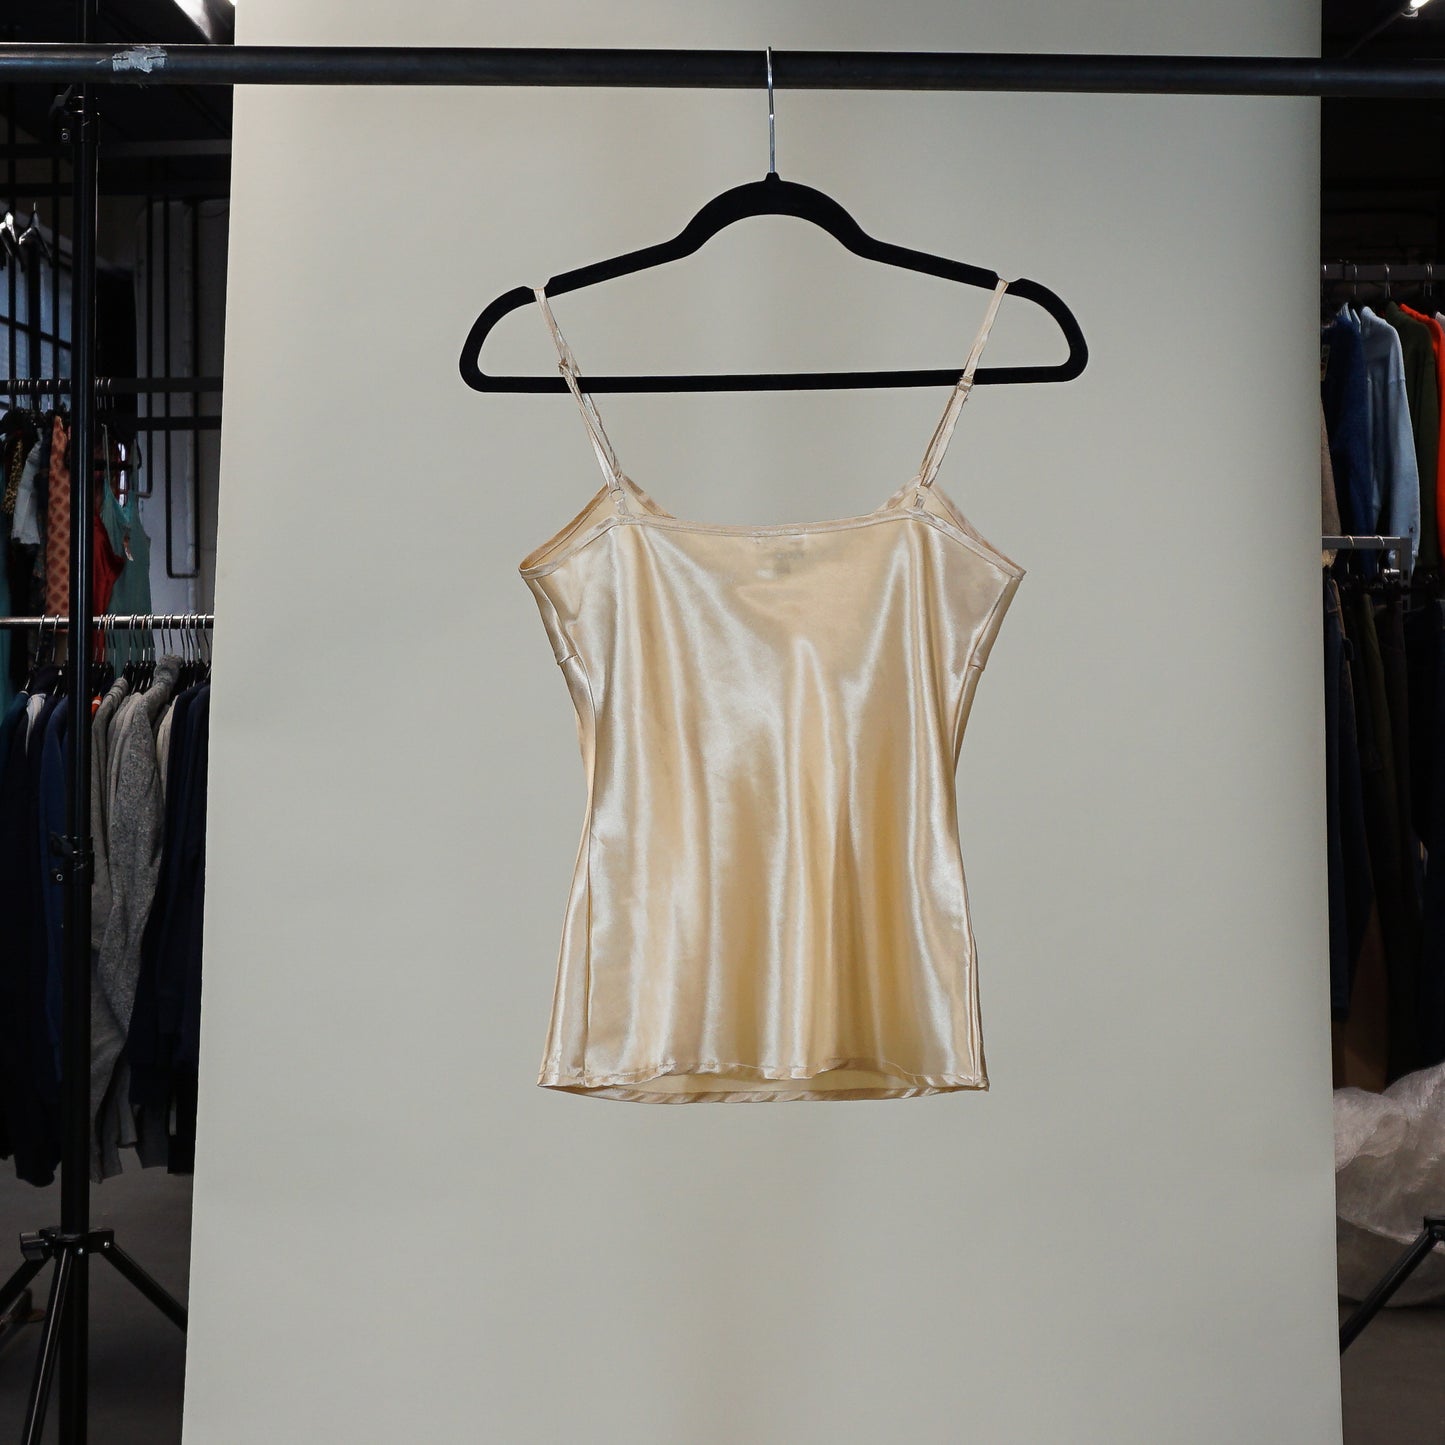 Y2K 'Together' Gold Satin Lingerie Top (Women's XS)